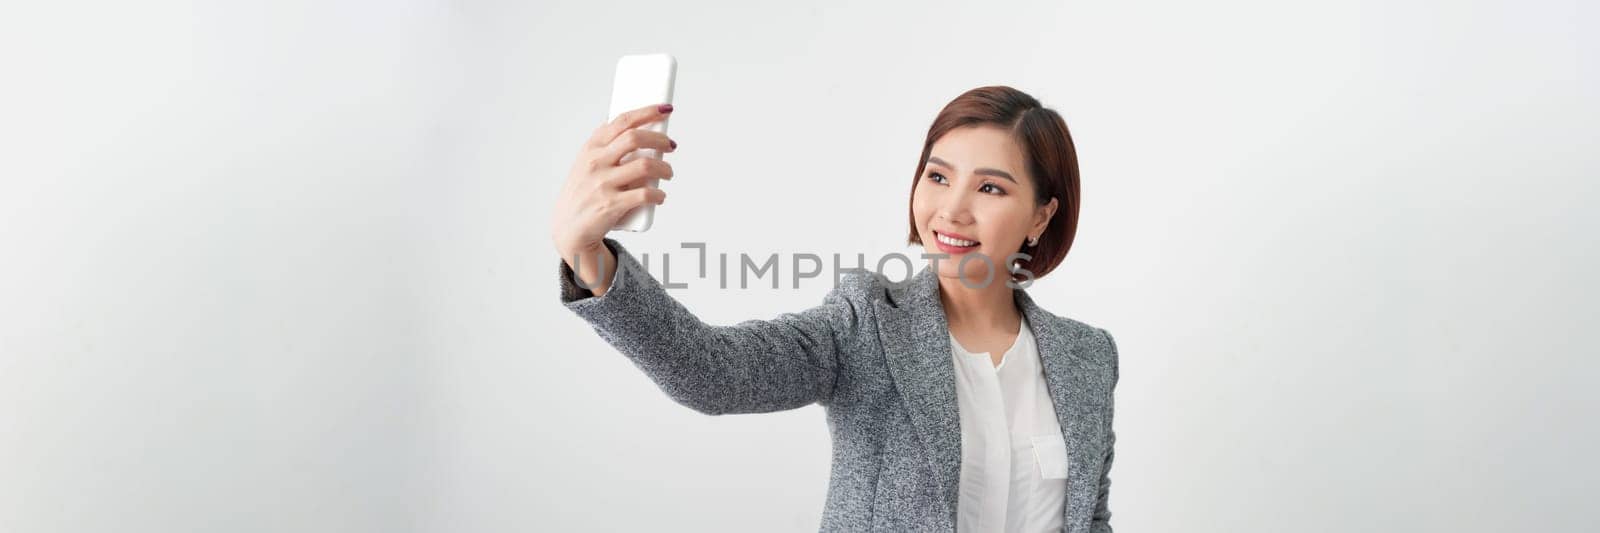 Banner of a smiling woman taking selfie photo on smartphone over gray background by makidotvn